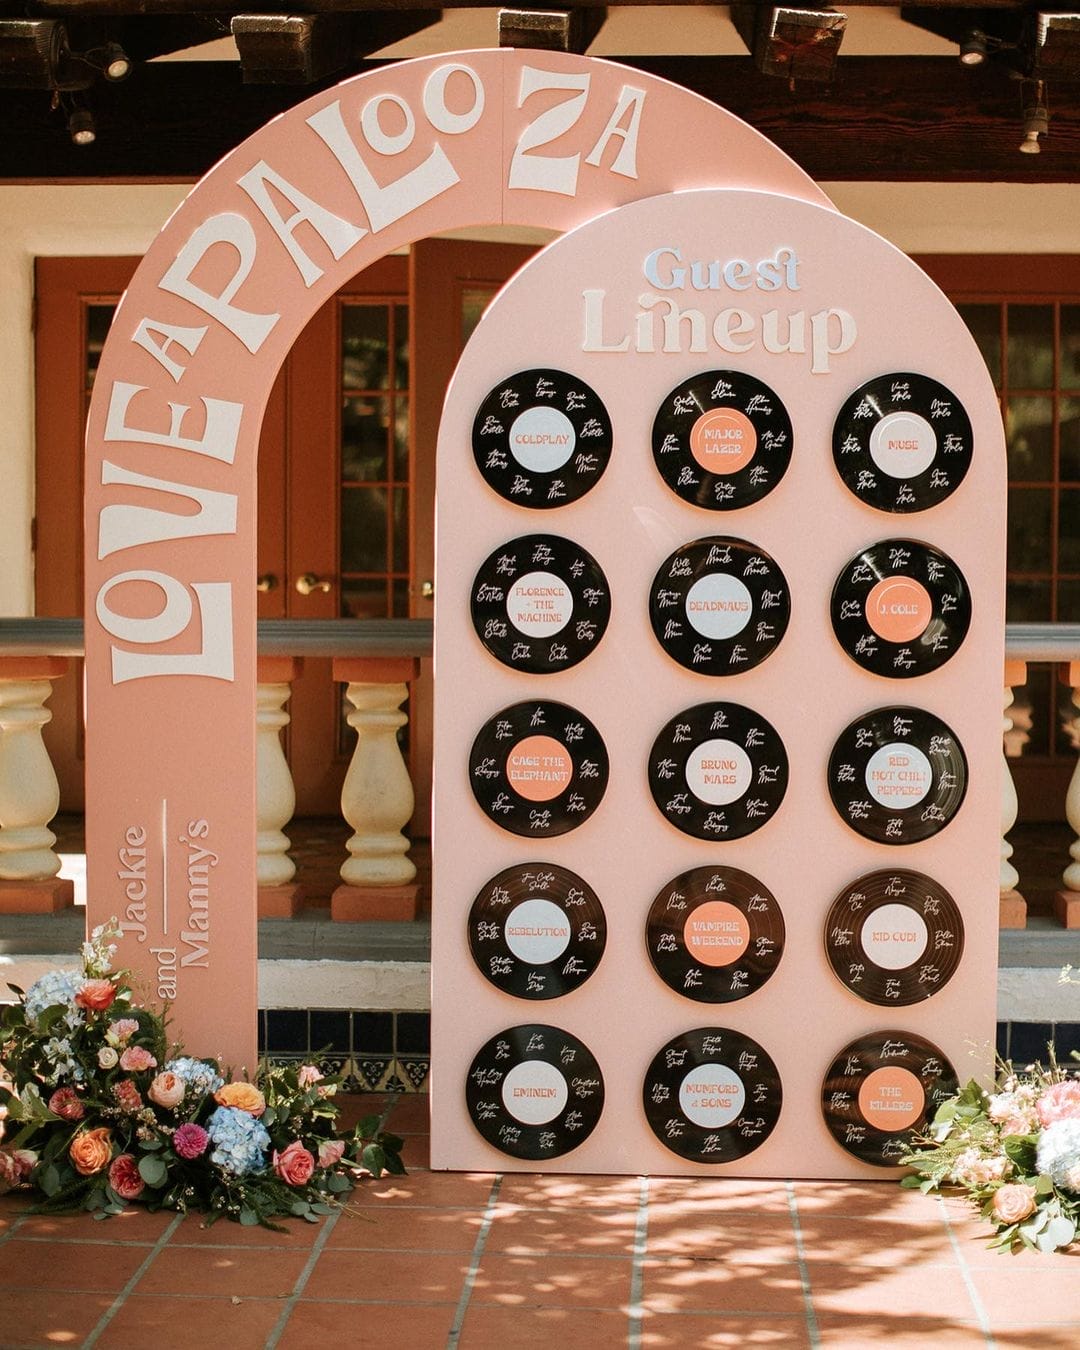 Creative Music Festival Inspired Unique Wedding Seating Chart Ideas With Vinyl Records